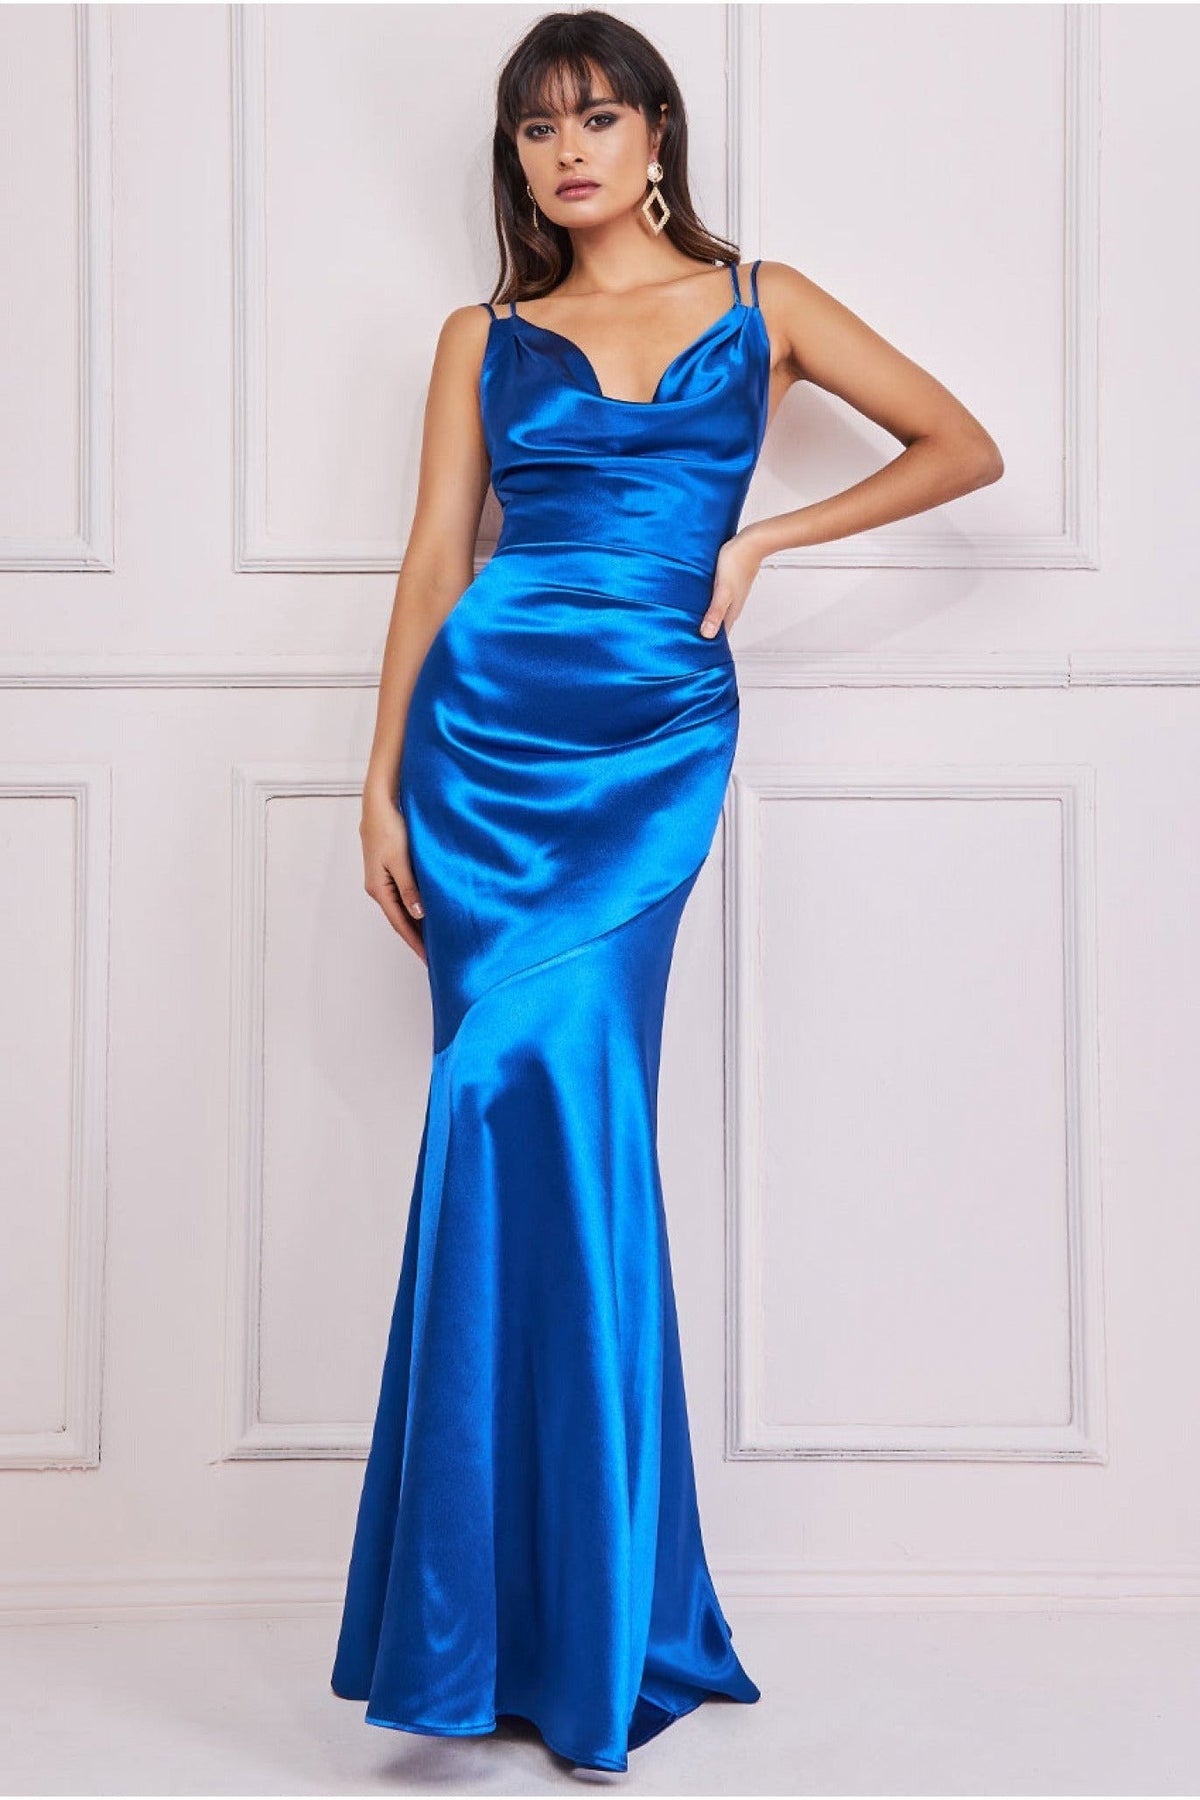 Cowl Neck With Strappy Back Satin Maxi - Royal Blue DR2113